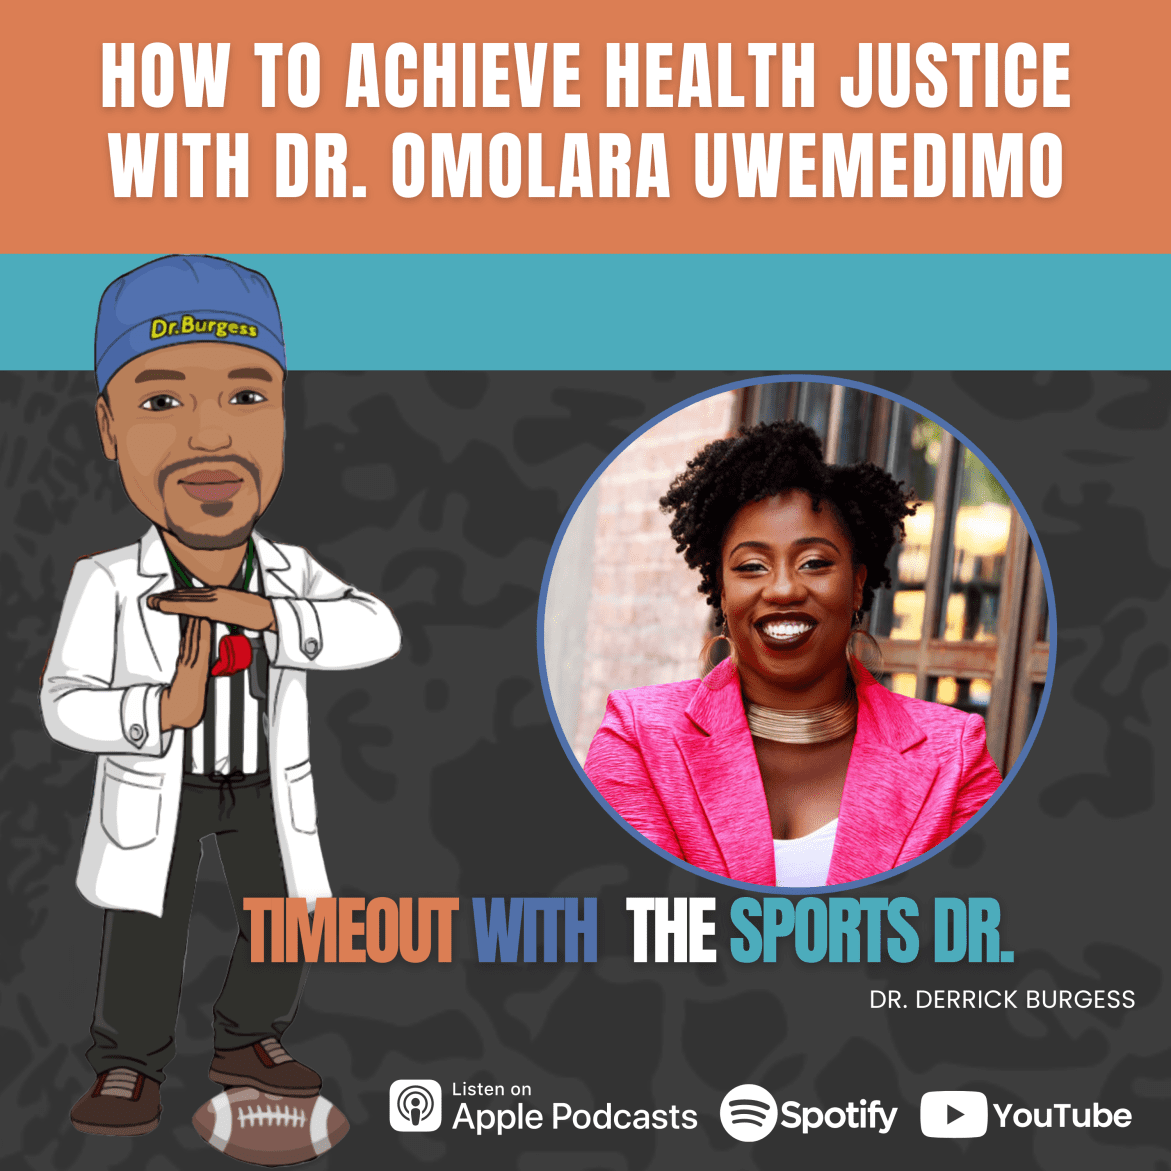 Black Podcasting - How to Achieve Health Justice with Dr. Omolara Uwemedimo